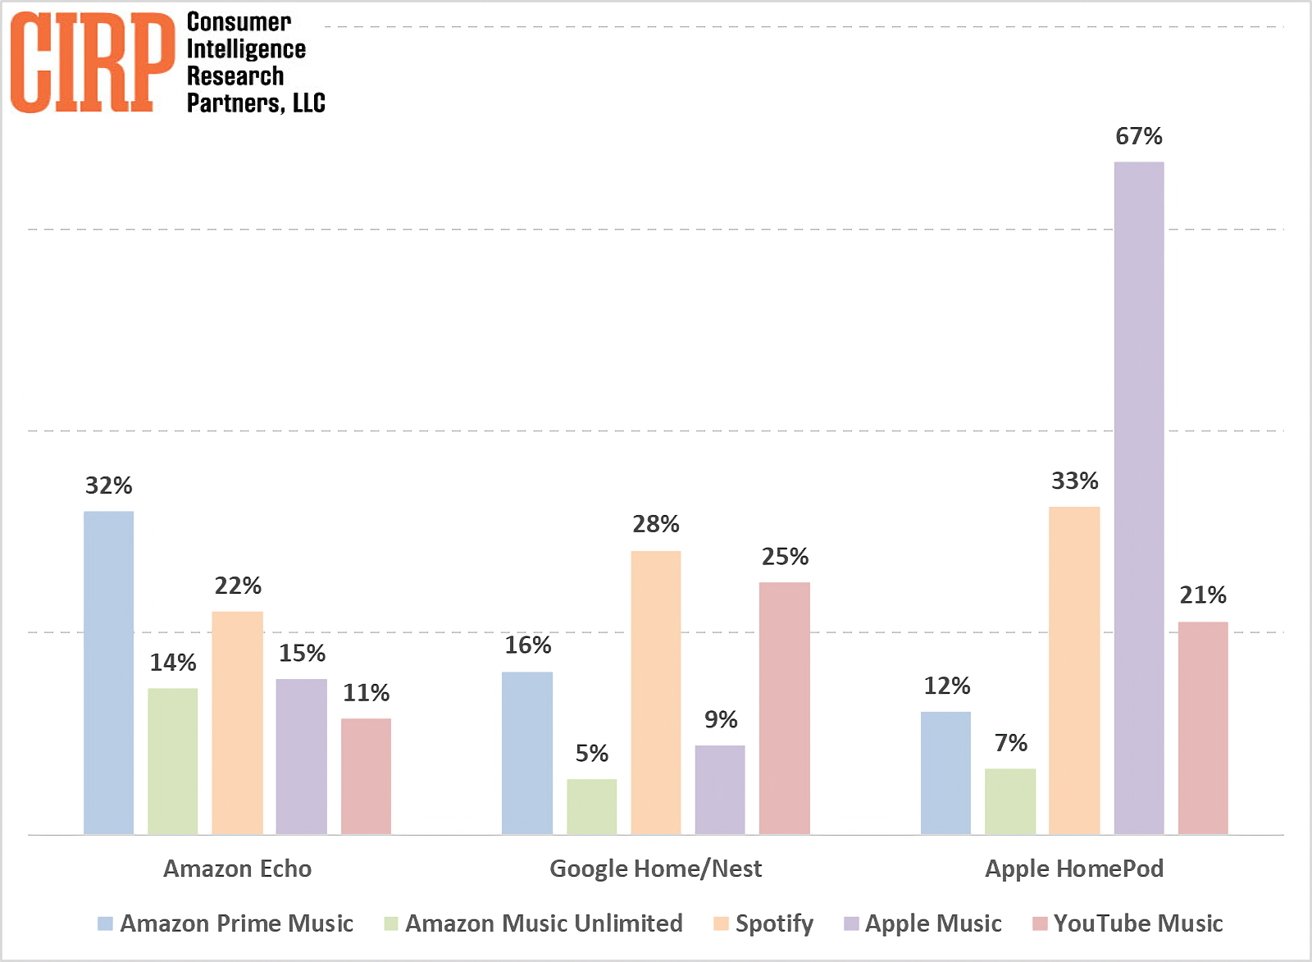 Bar chart showing music service usage on Amazon Echo, Google Home/Nest, Apple HomePod; YouTube Music leads on HomePod at 67%.